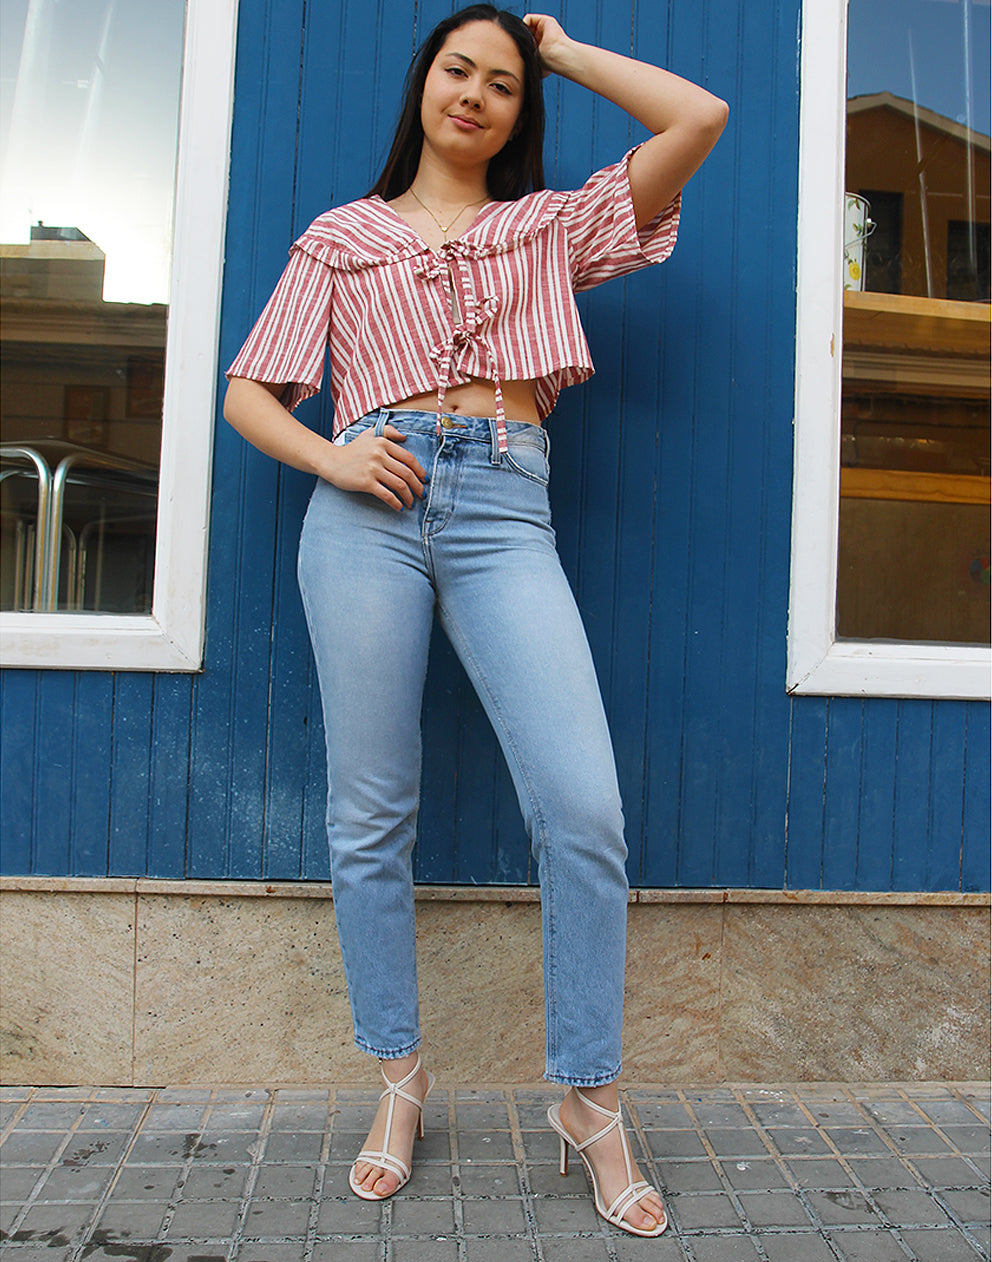 Wide Collar Blouse in Red Stripe